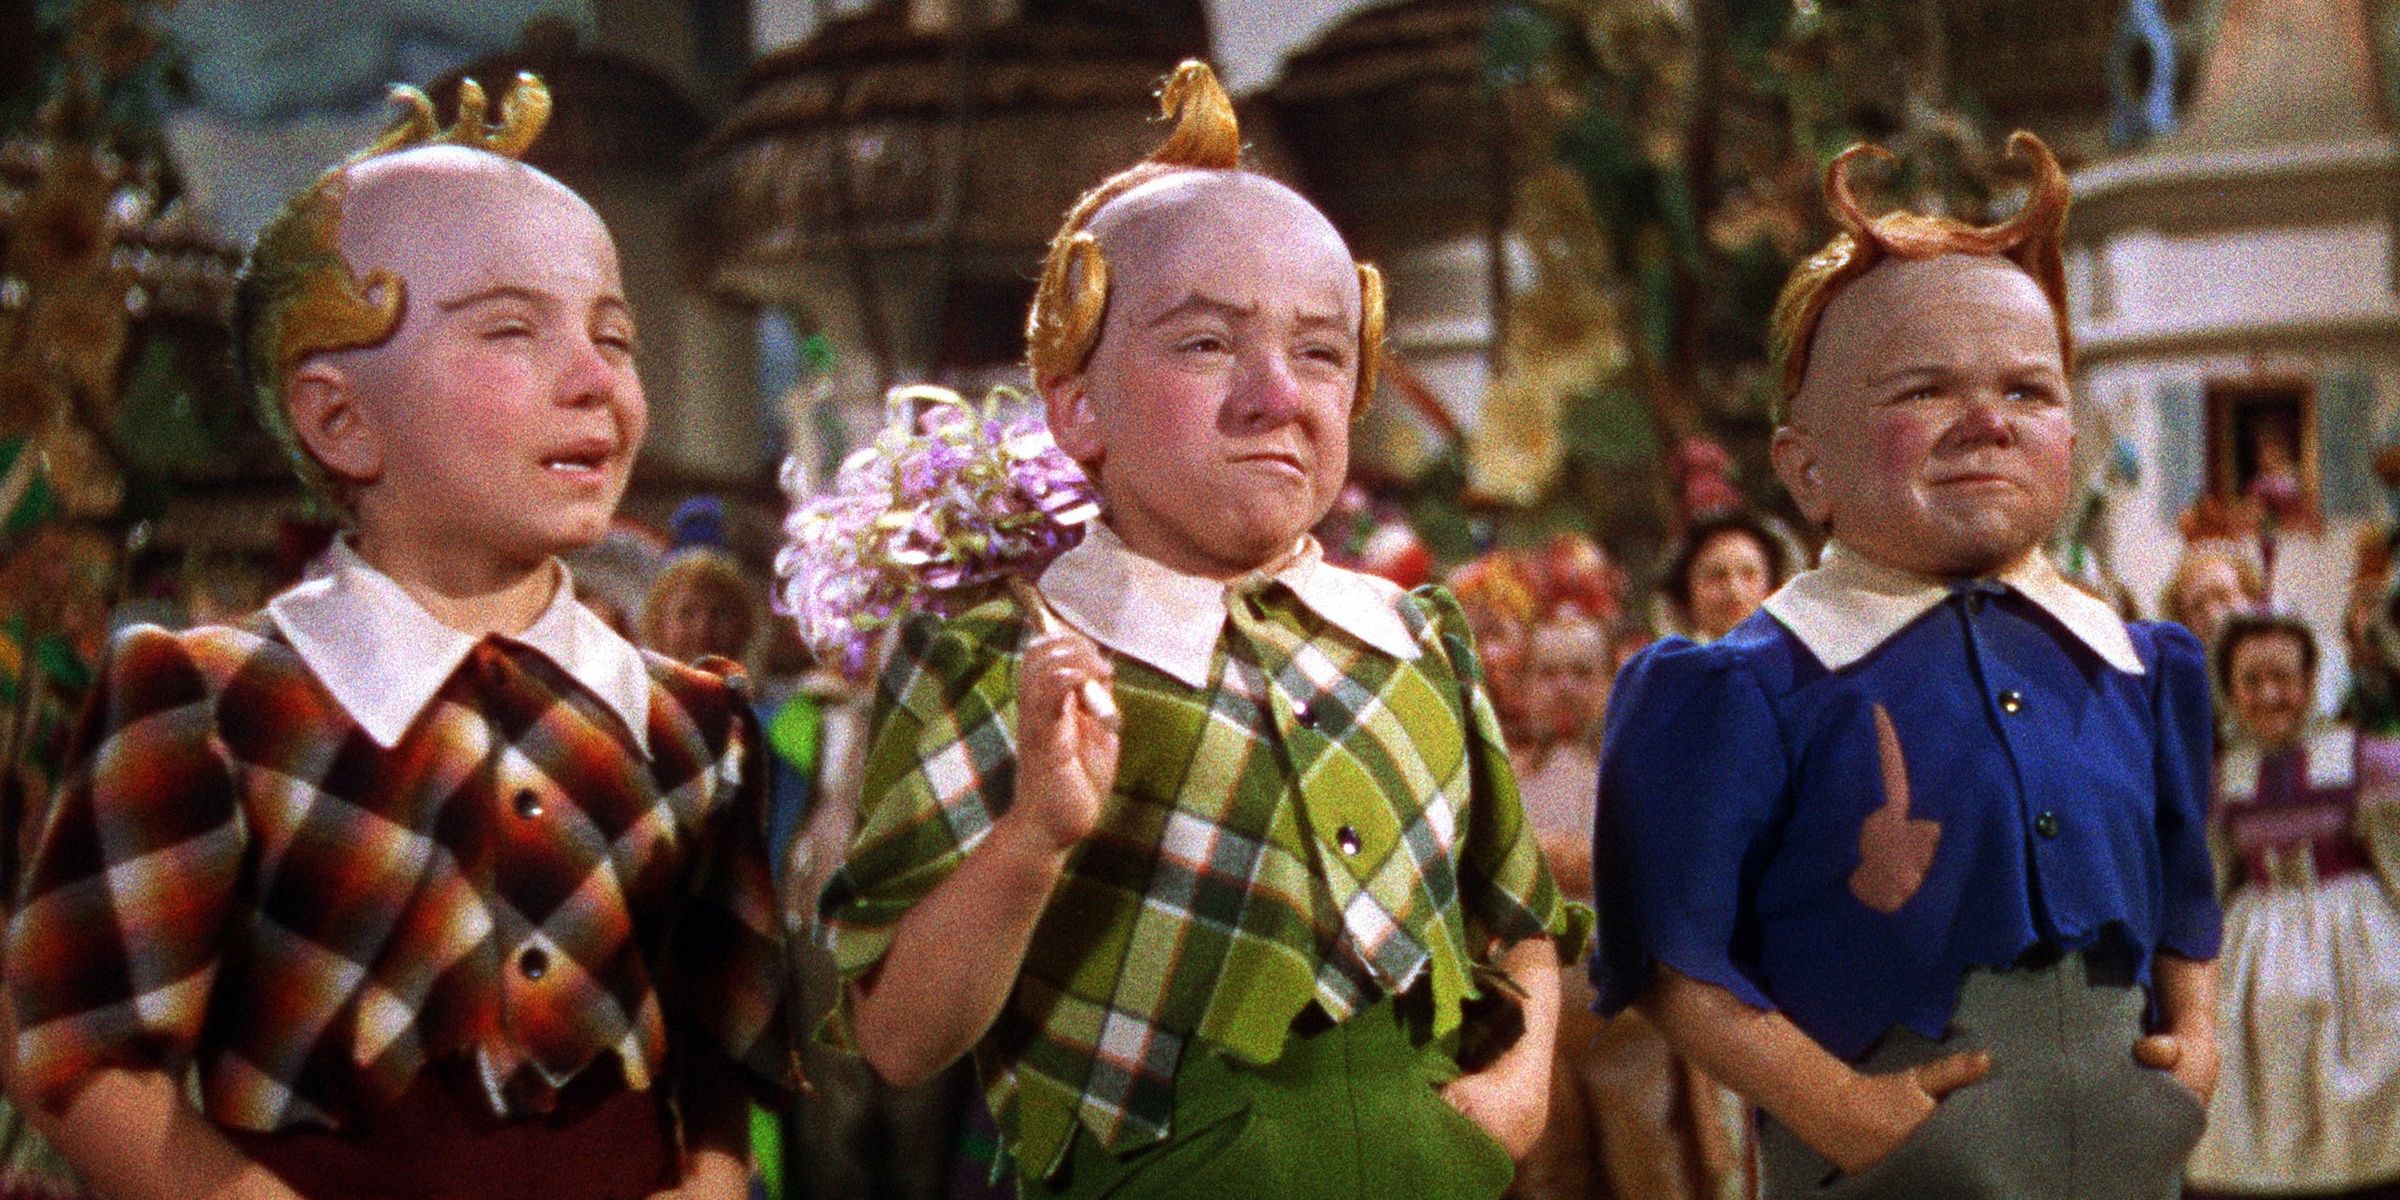 10 Main Characters In Wizard Of Oz Ranked By Likability